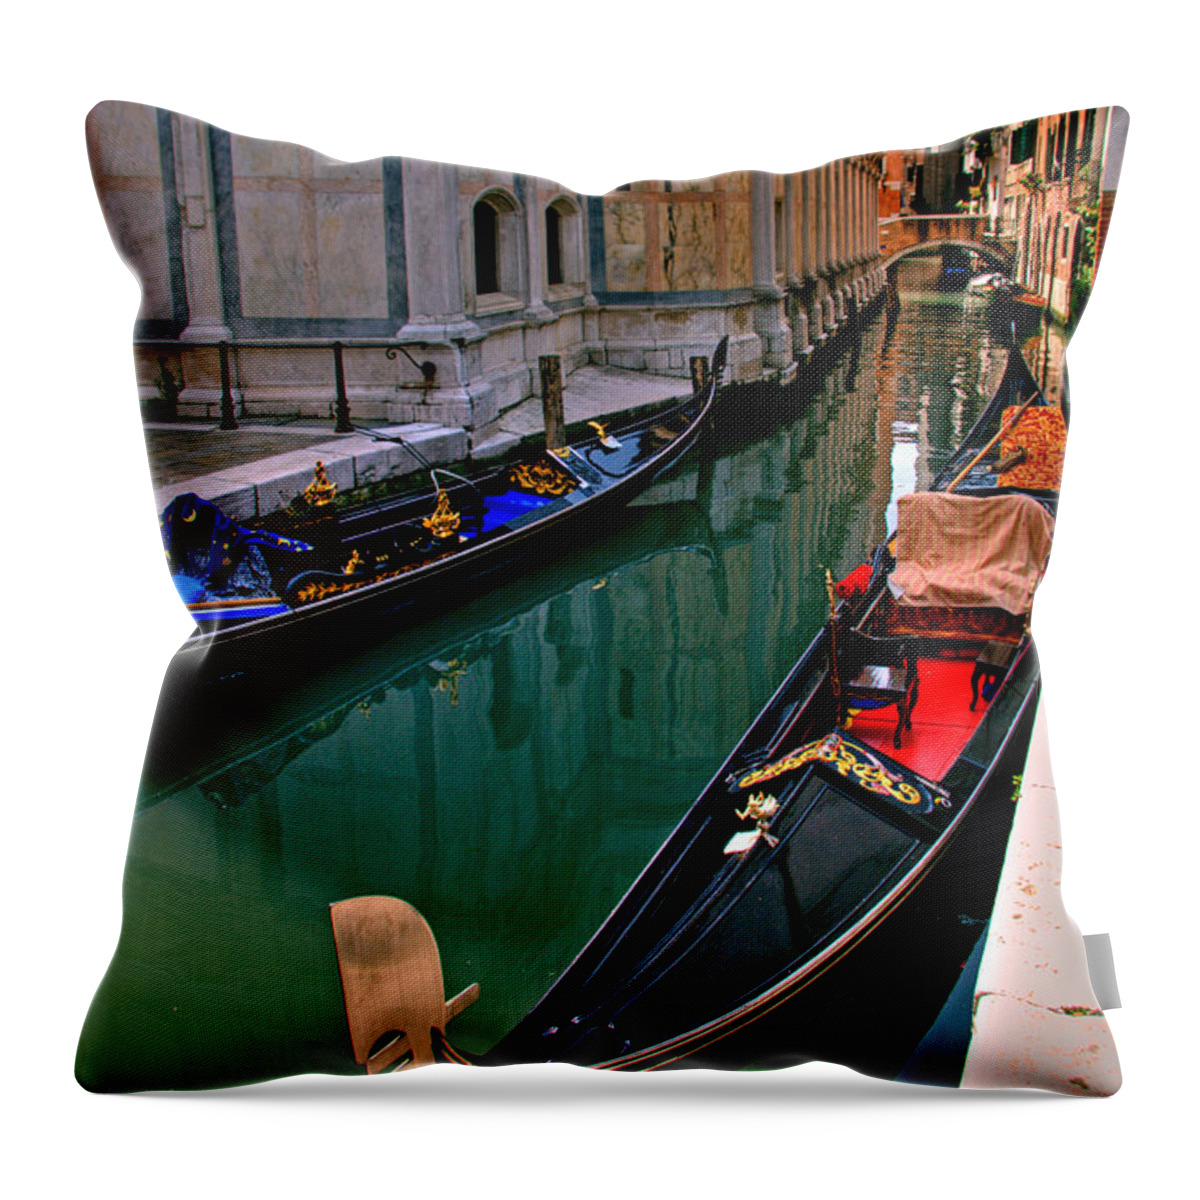 Italy Throw Pillow featuring the photograph Black Gondola by Peter Tellone